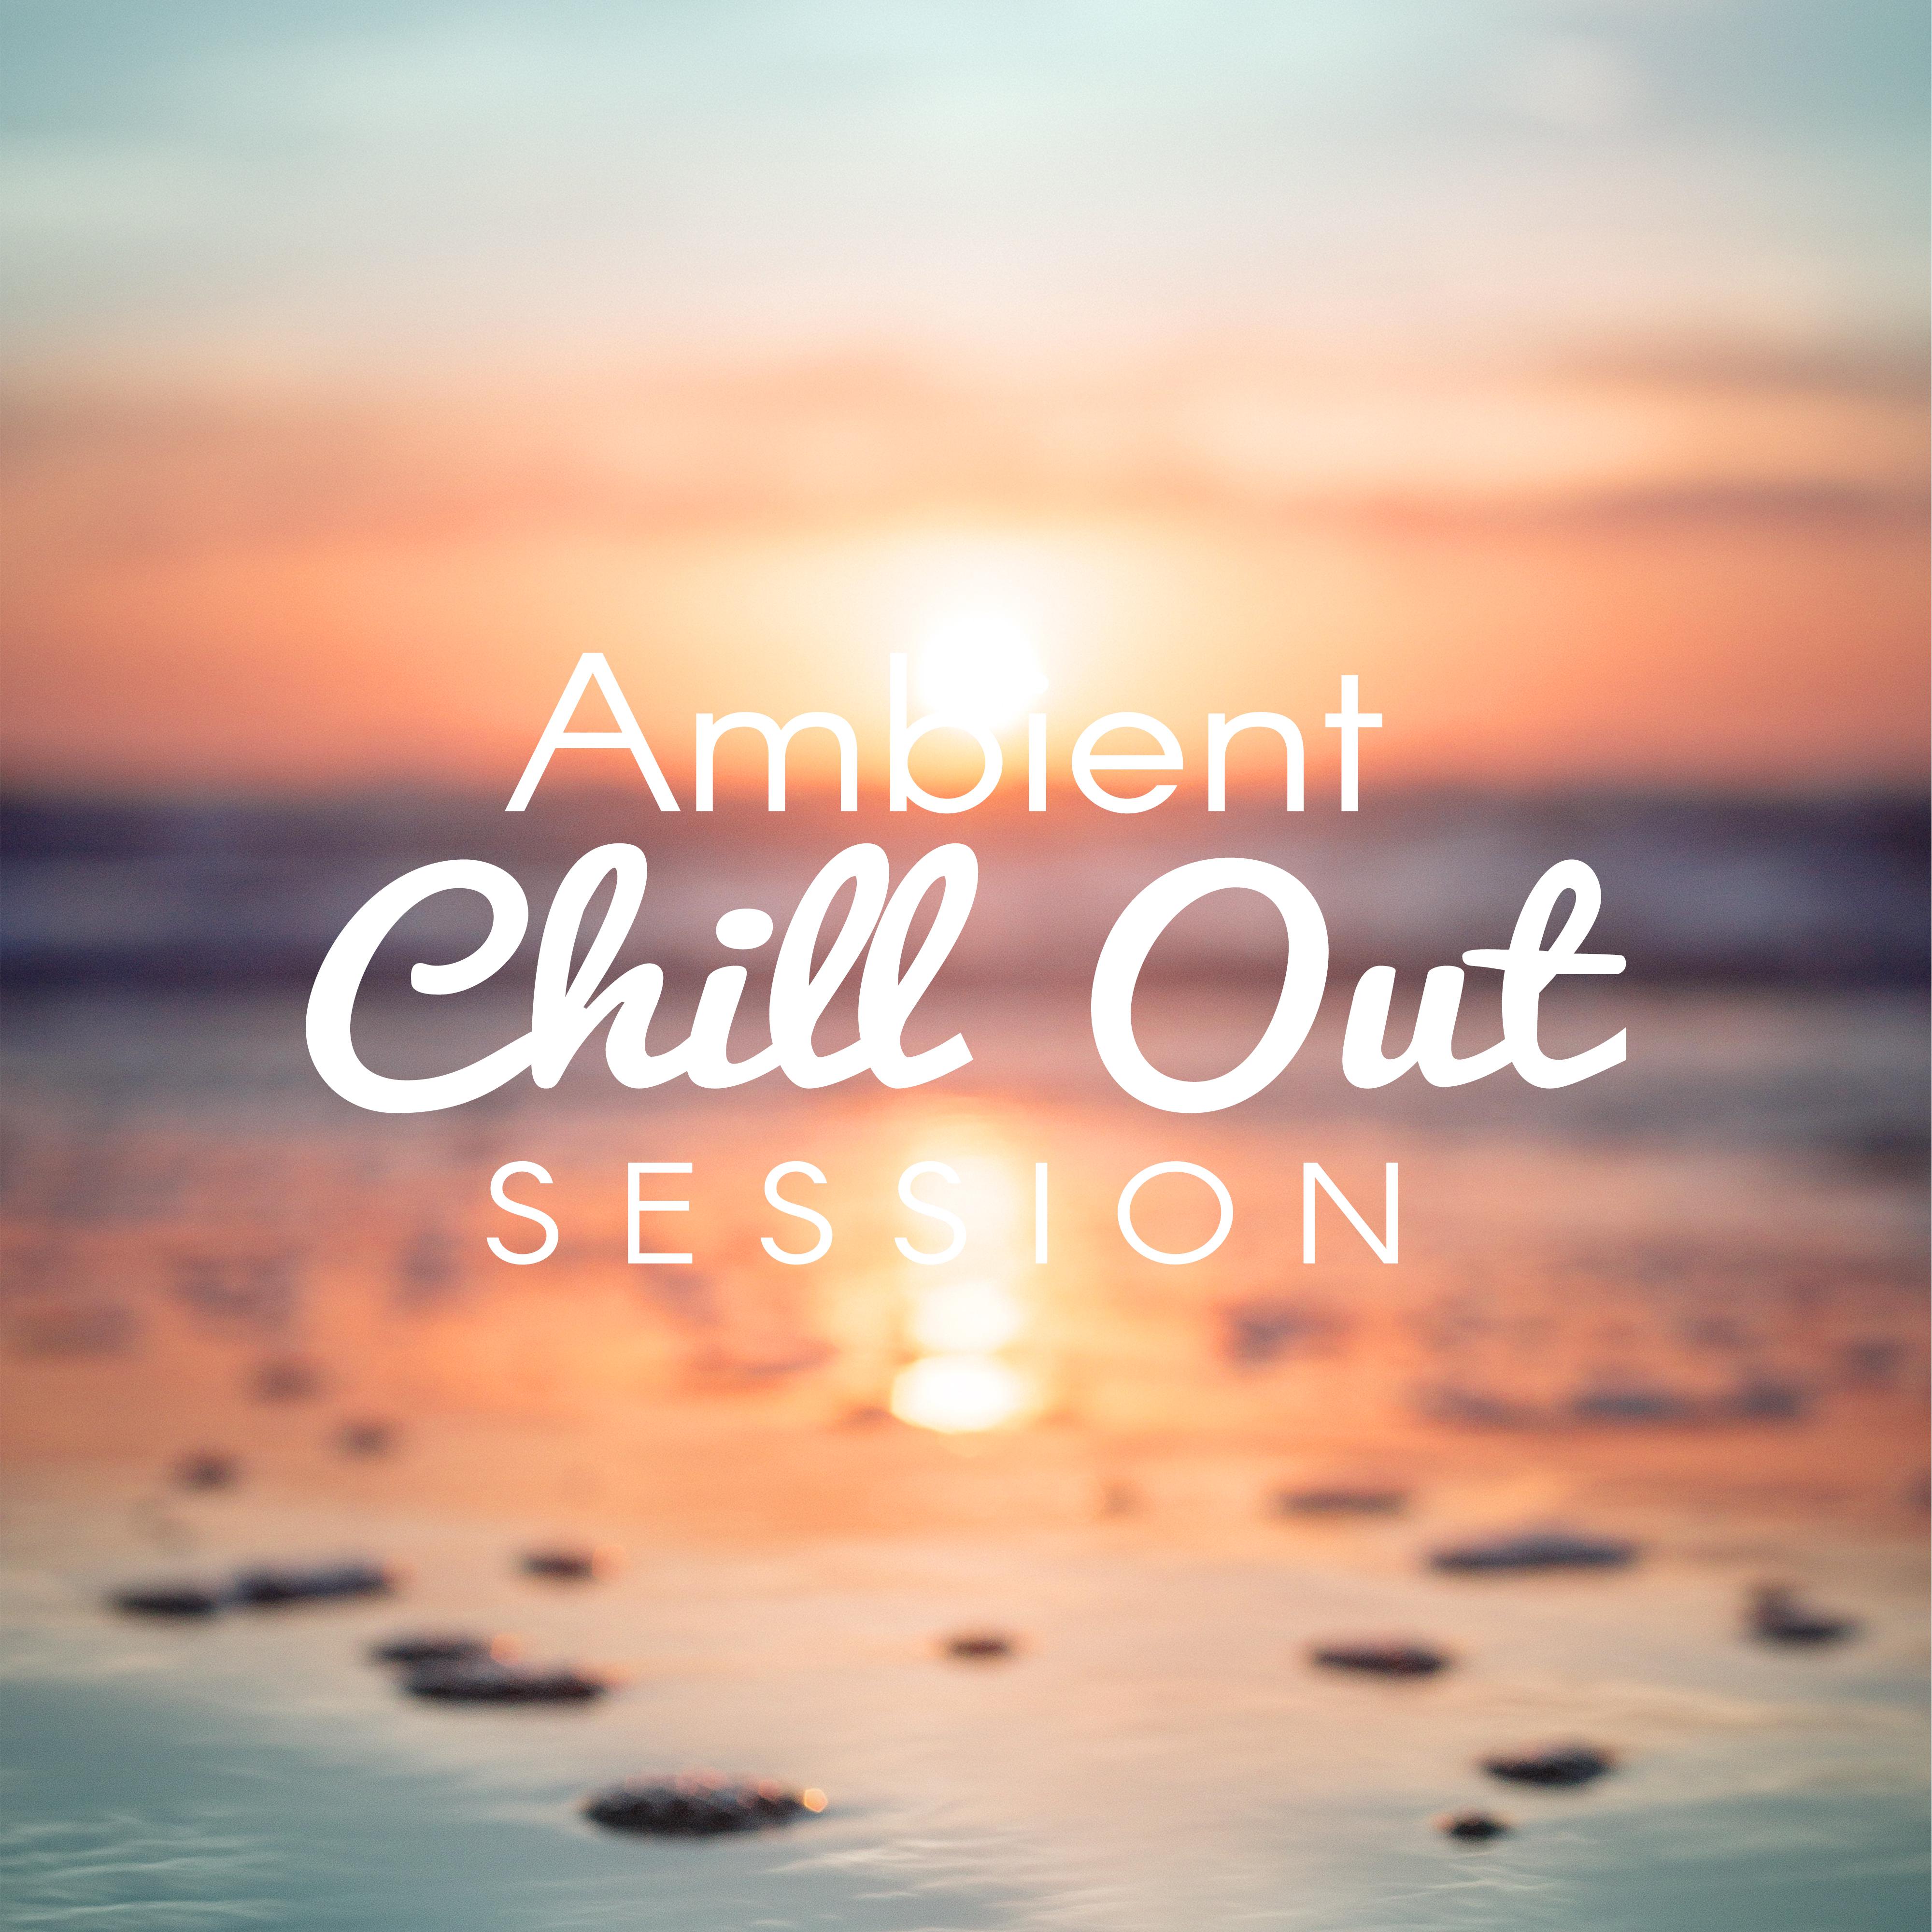 Ambient Chill Out Session – Relaxing Chill Out Music, Electronic Vibrations, Downbeat, Mr Chillout